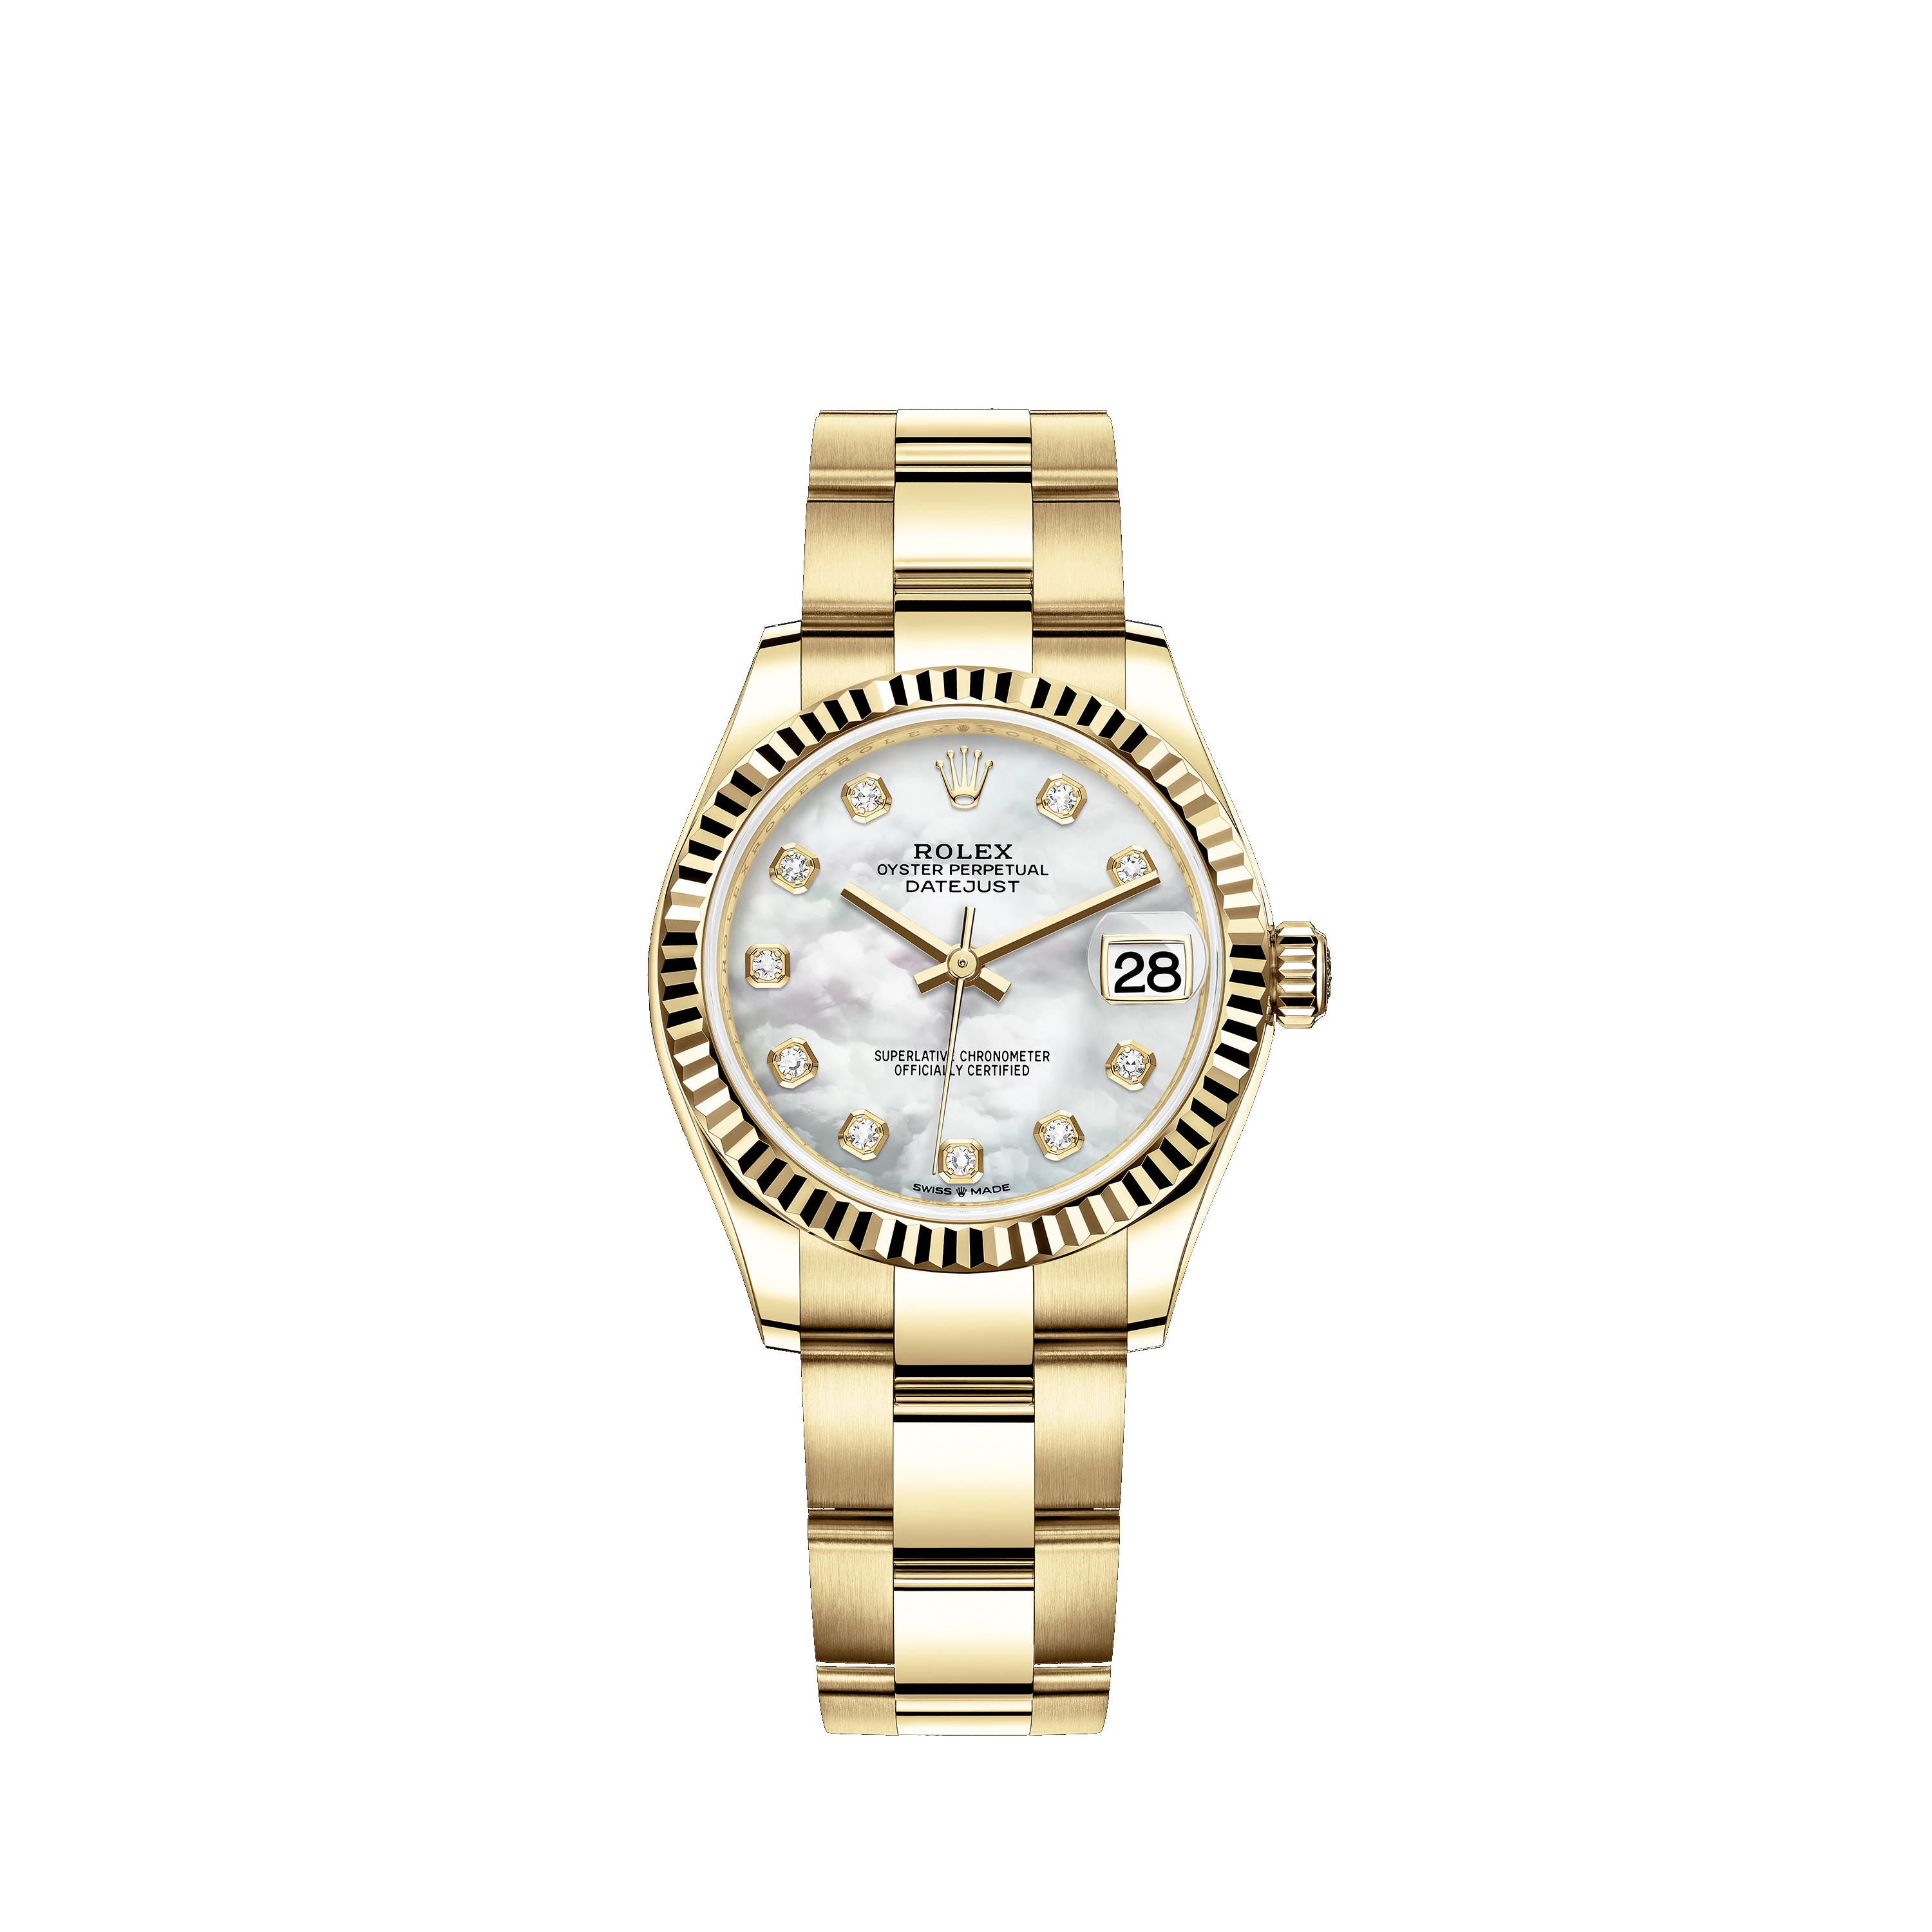 Datejust 31 278278 Gold Watch (White Mother-of-Pearl Set with Diamonds)